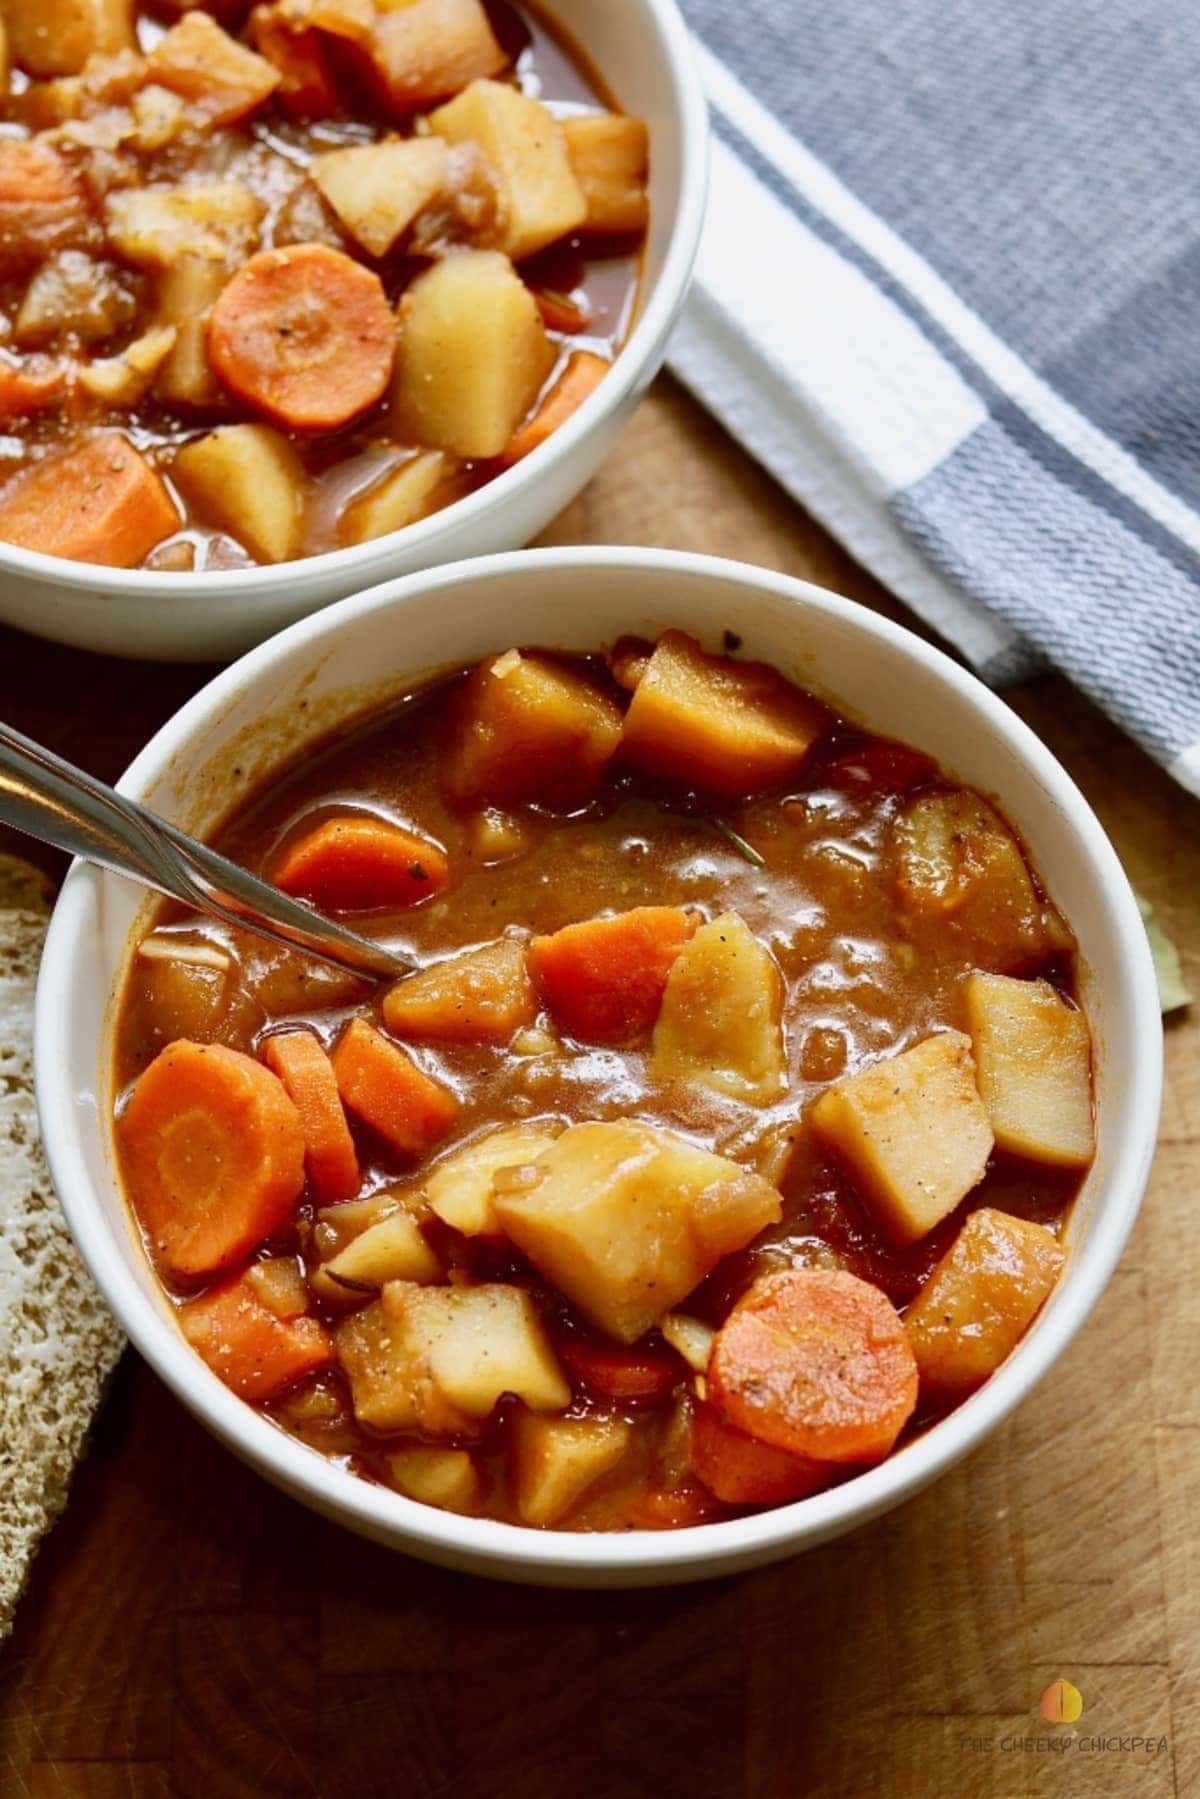 Bowl of homemade Hearty Vegetable Stew with carrots and potatoes